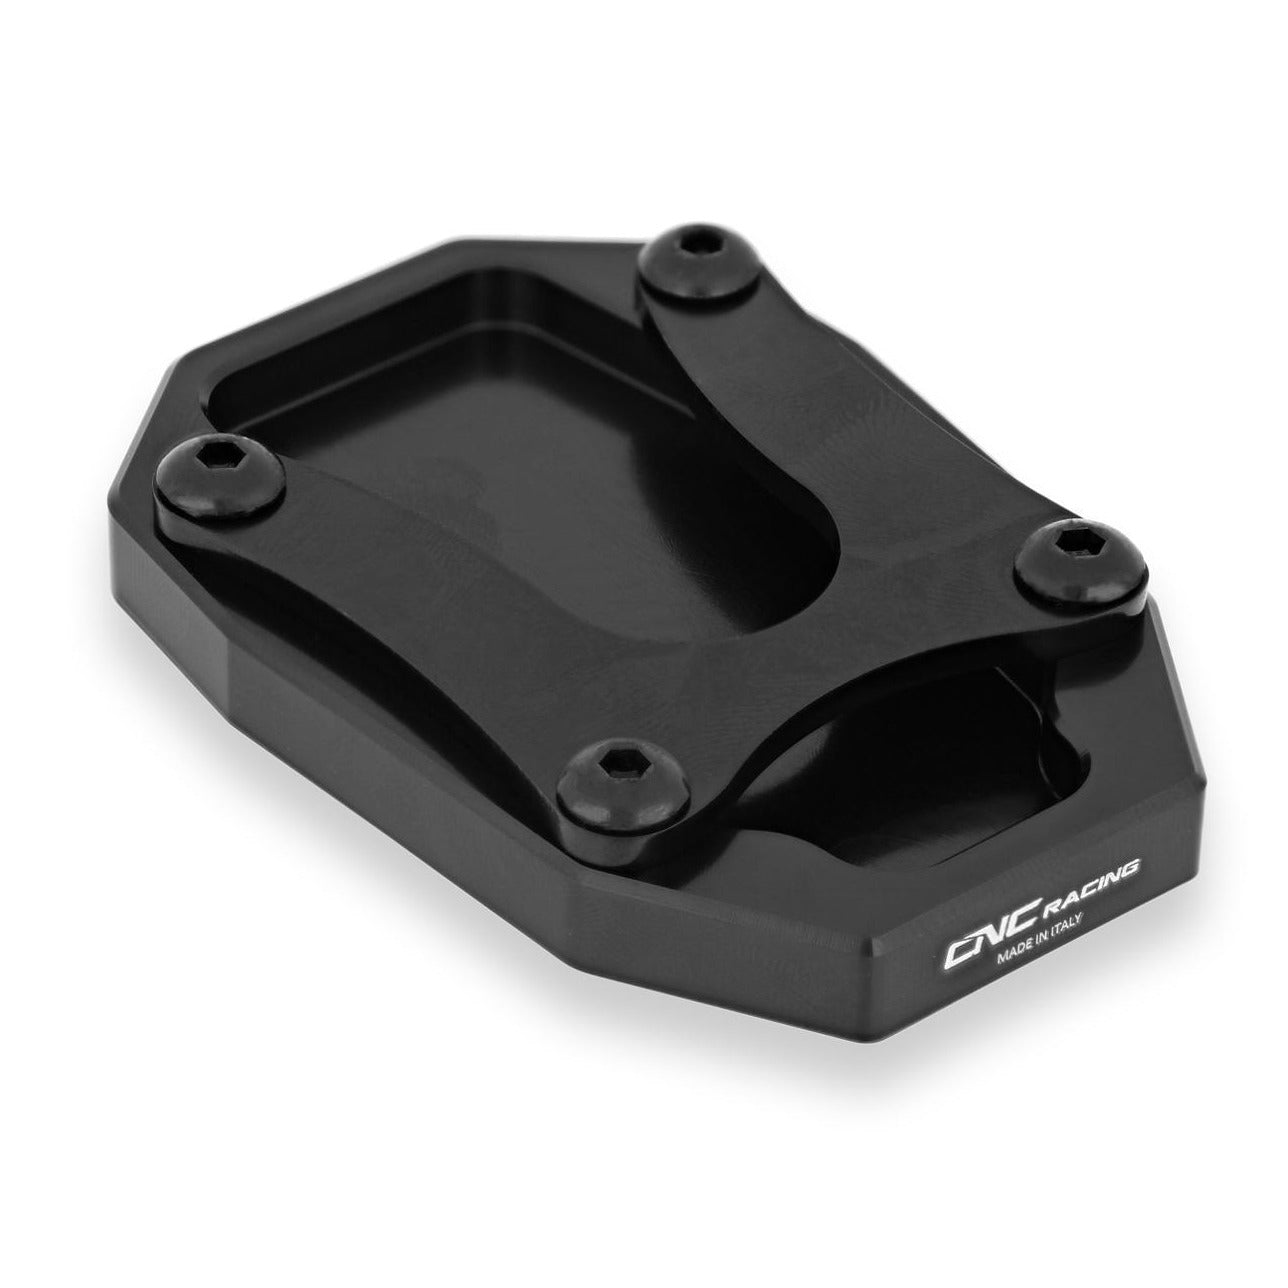 CNC Racing Ducati side stand extension ( BM503 )